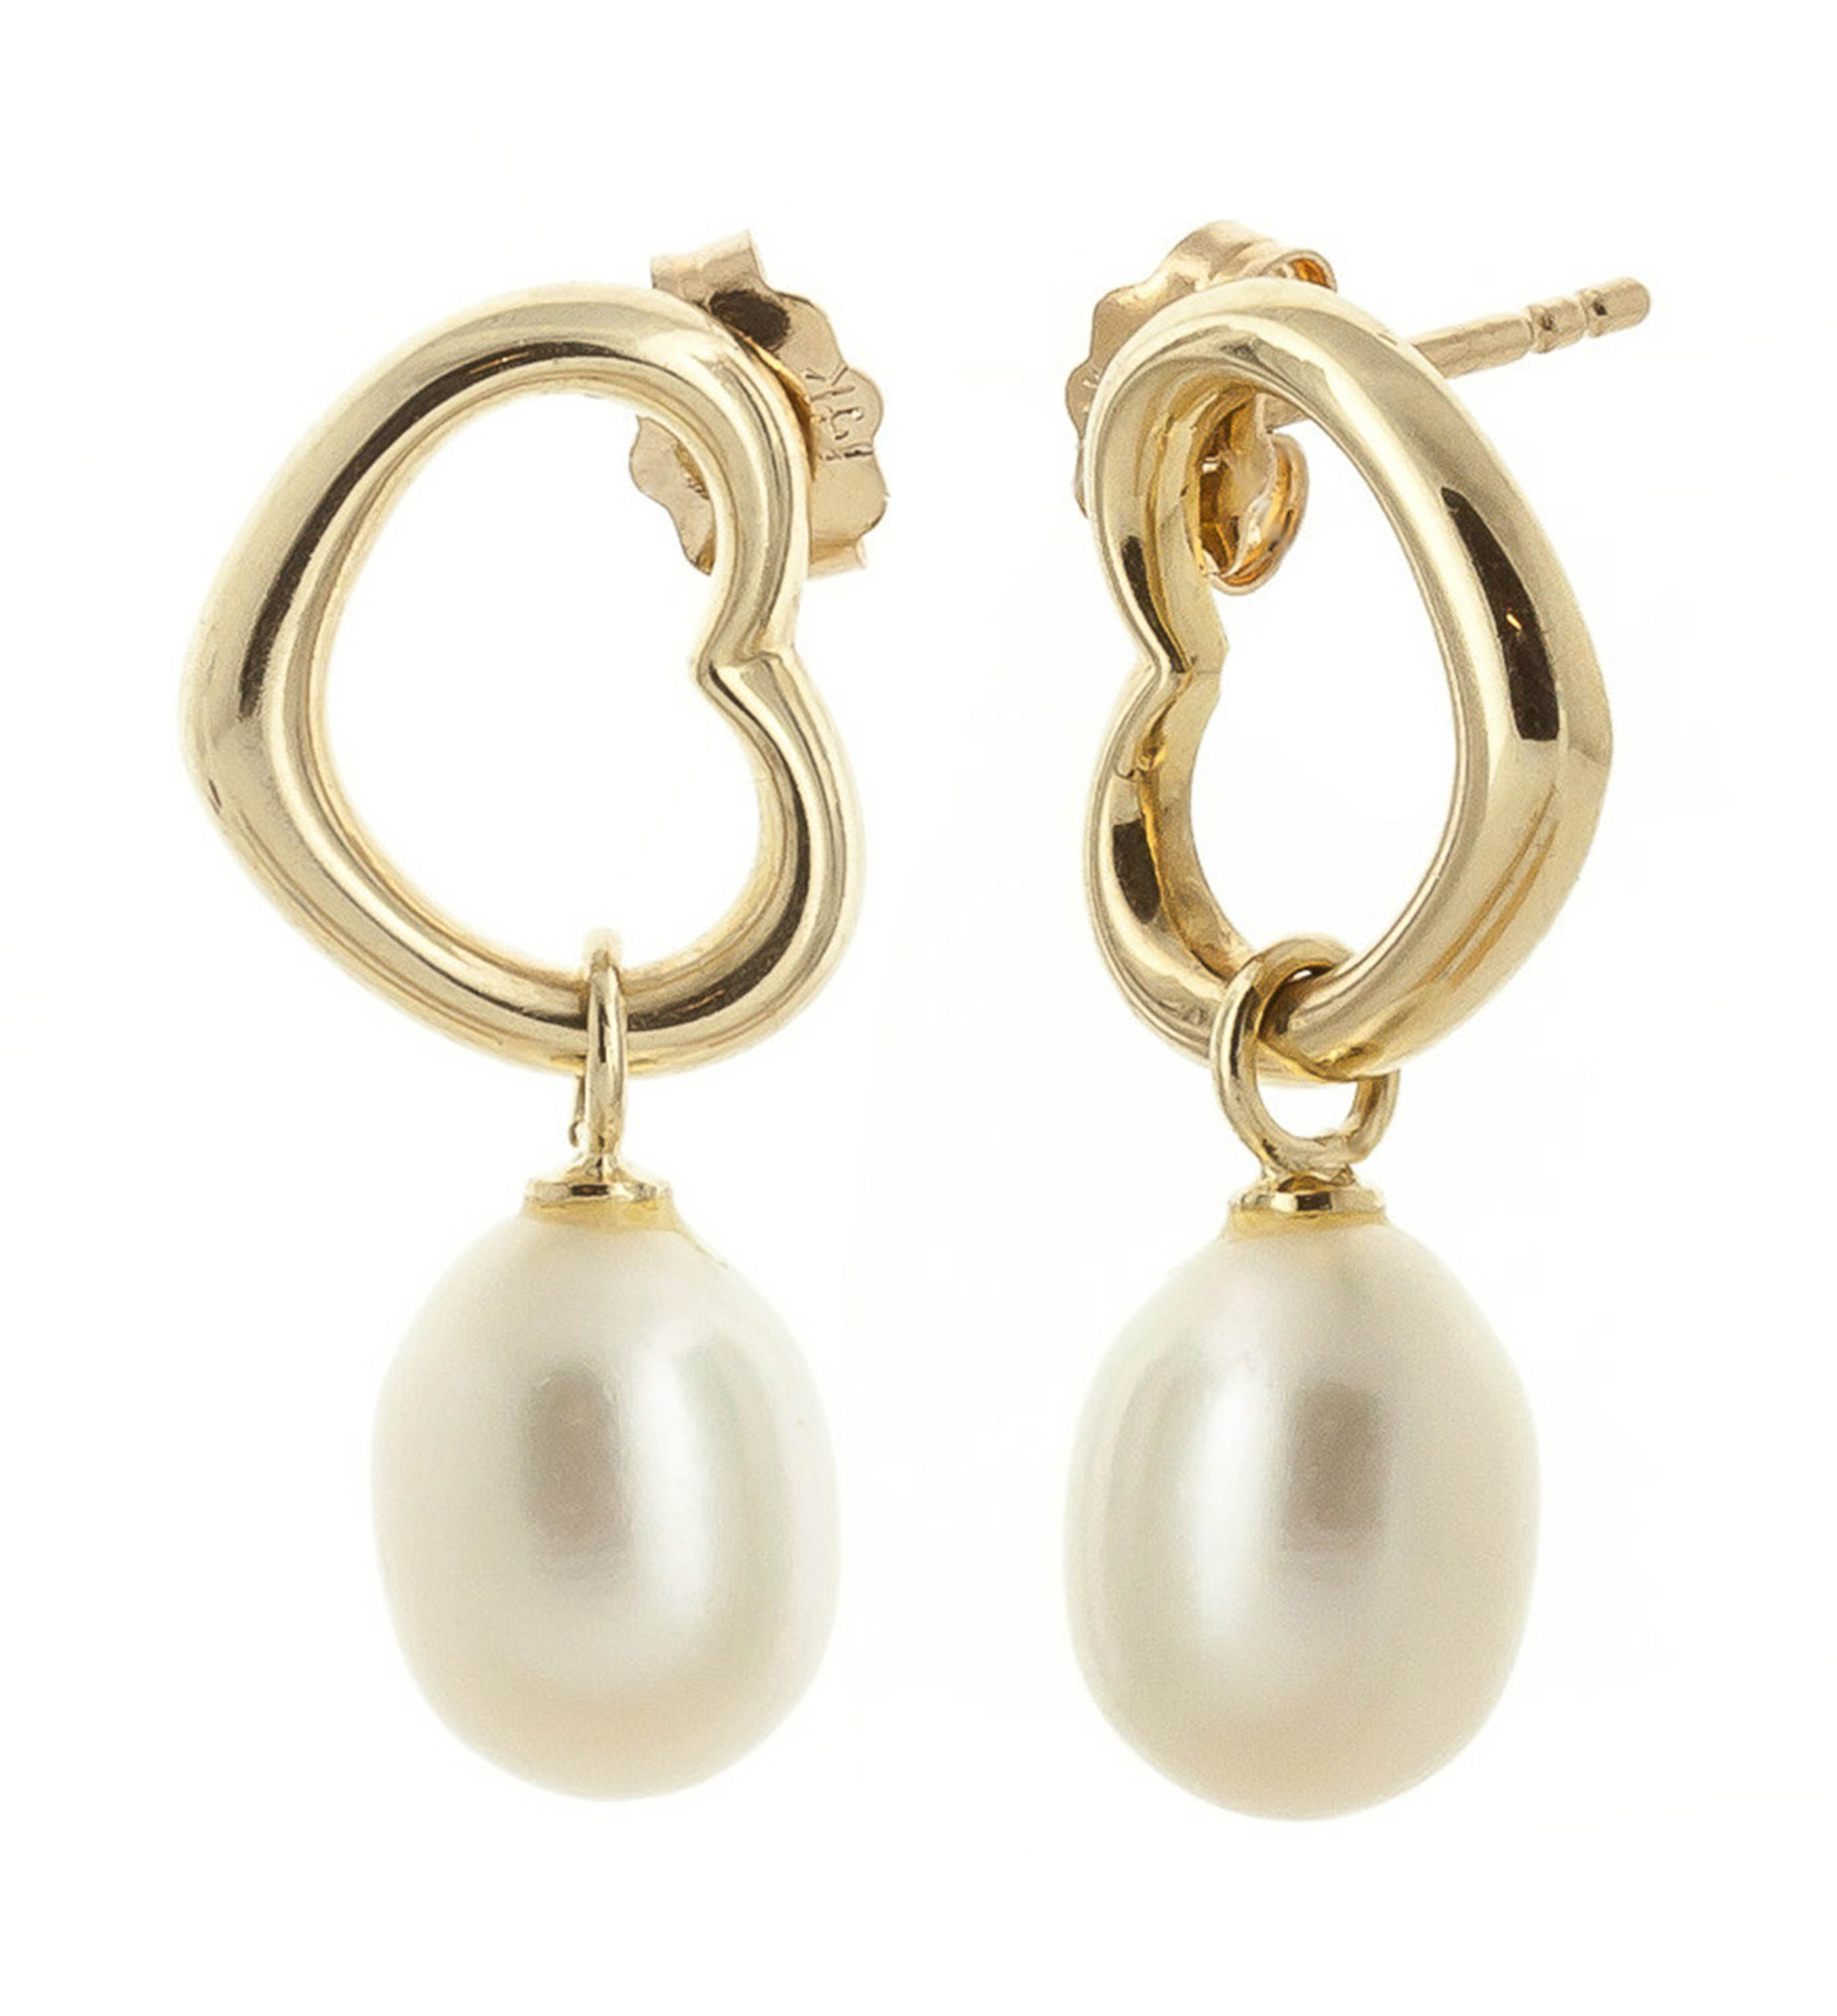 Galaxy Gold 8 Carat 14k Solid Gold Open Heart Stud Earrings with Dangling Freshwater-cultured Pearls - image 1 of 5